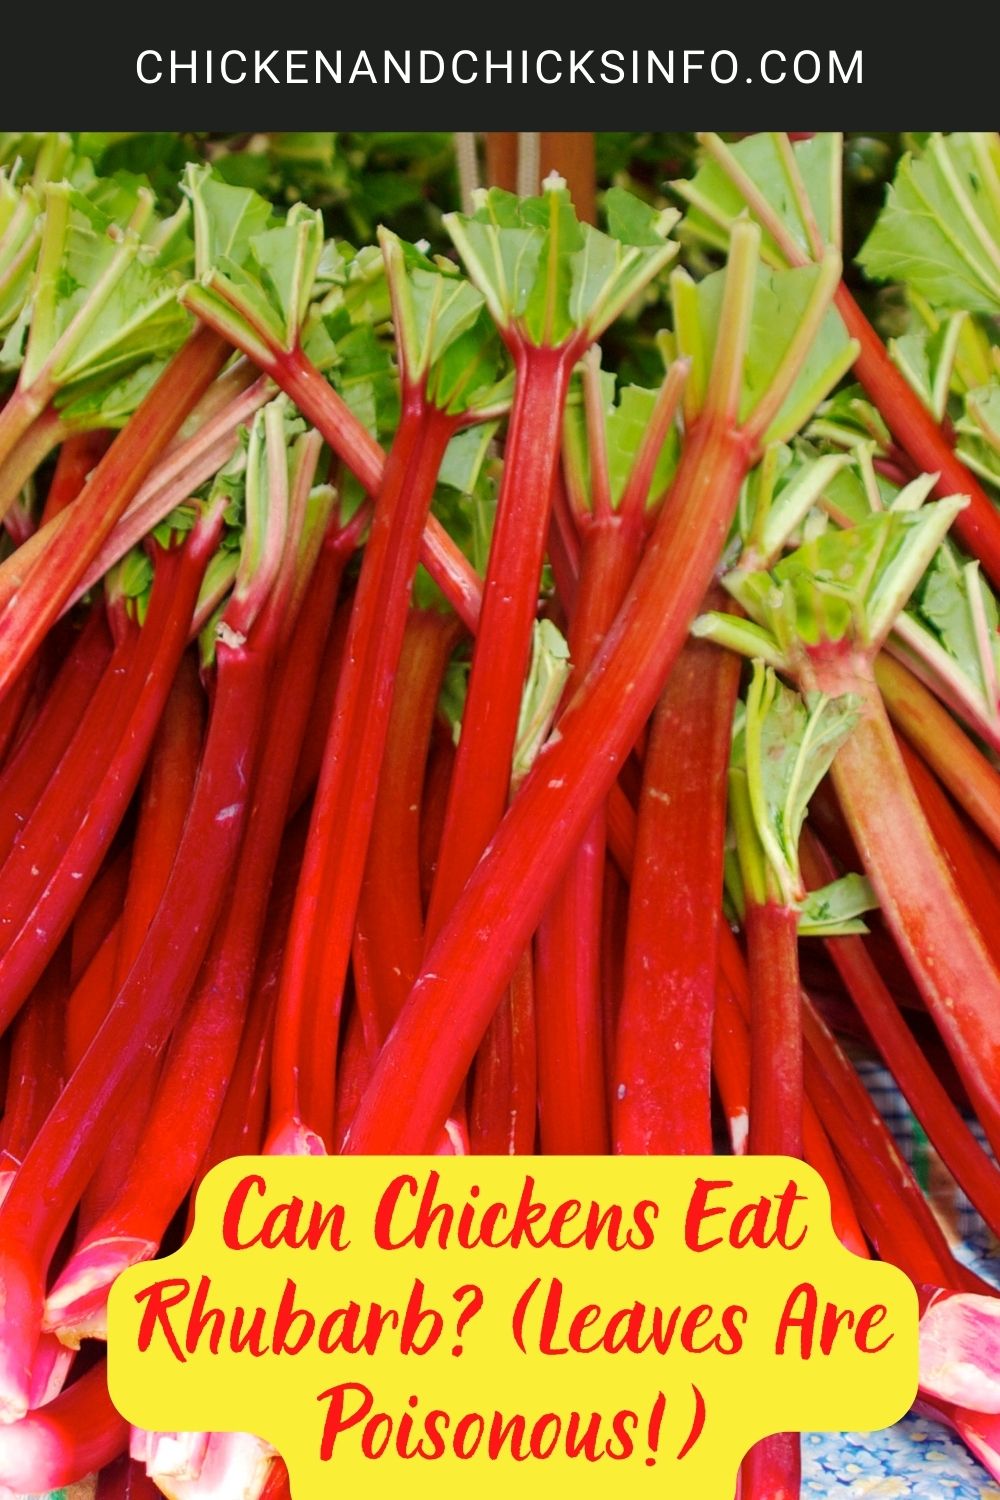 Can Chickens Eat Rhubarb? (Leaves Are Poisonous!) poster.
